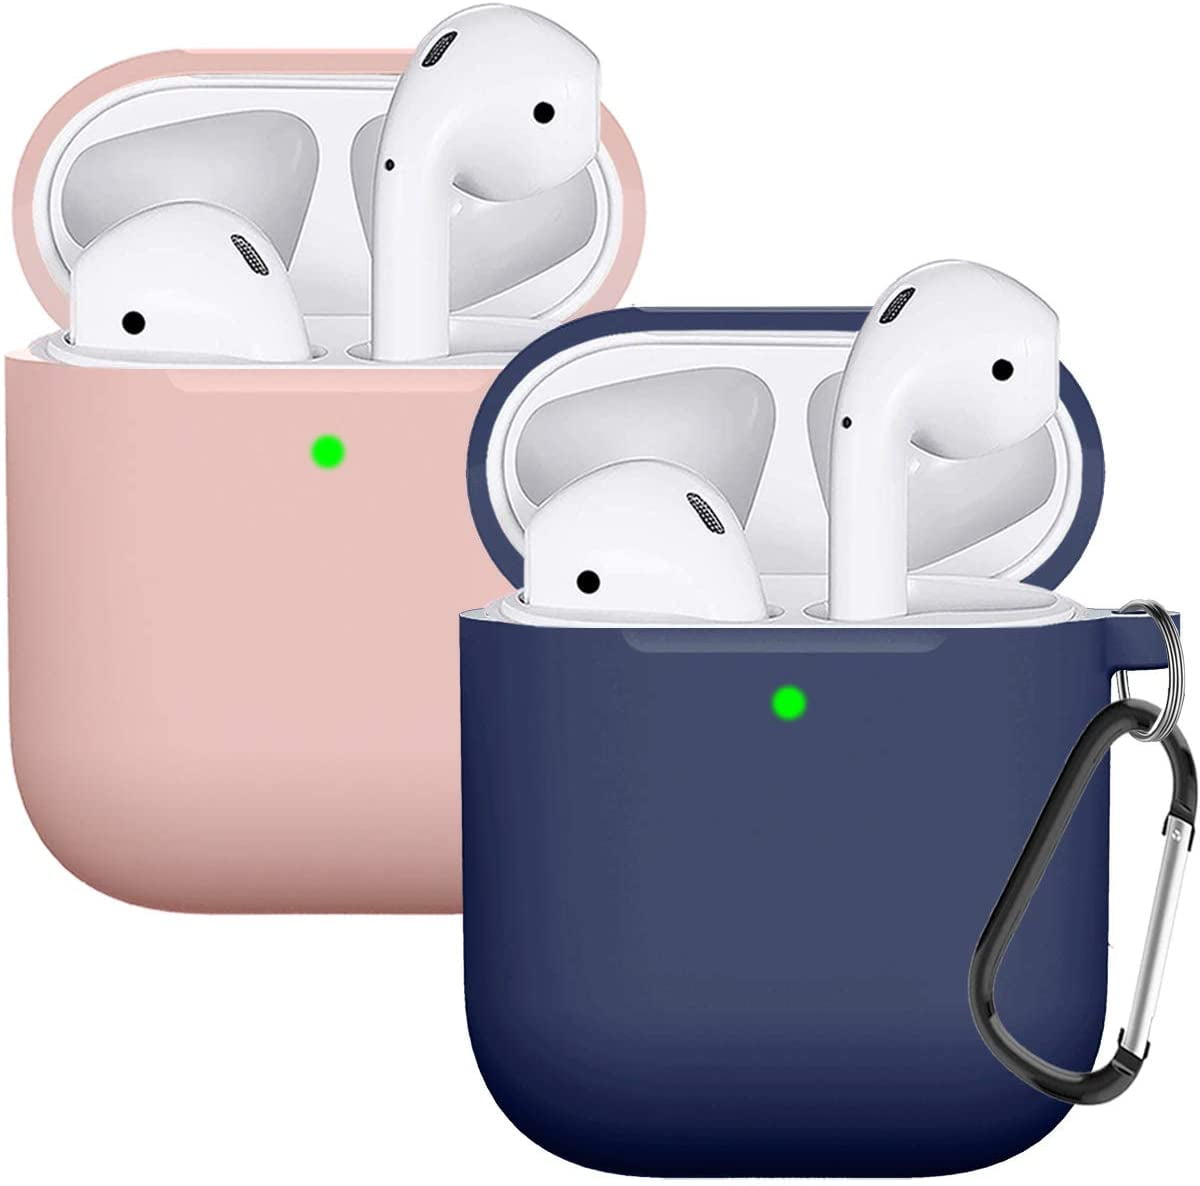  TANGABA AirPods Case Cover for AirPod 2&1, Full-Body Protective  Hard Shell Leather Airpods Protective Cover Case with Keychain for AirPods  Wireless Charging Case, Front LED Visible, Green : Electronics